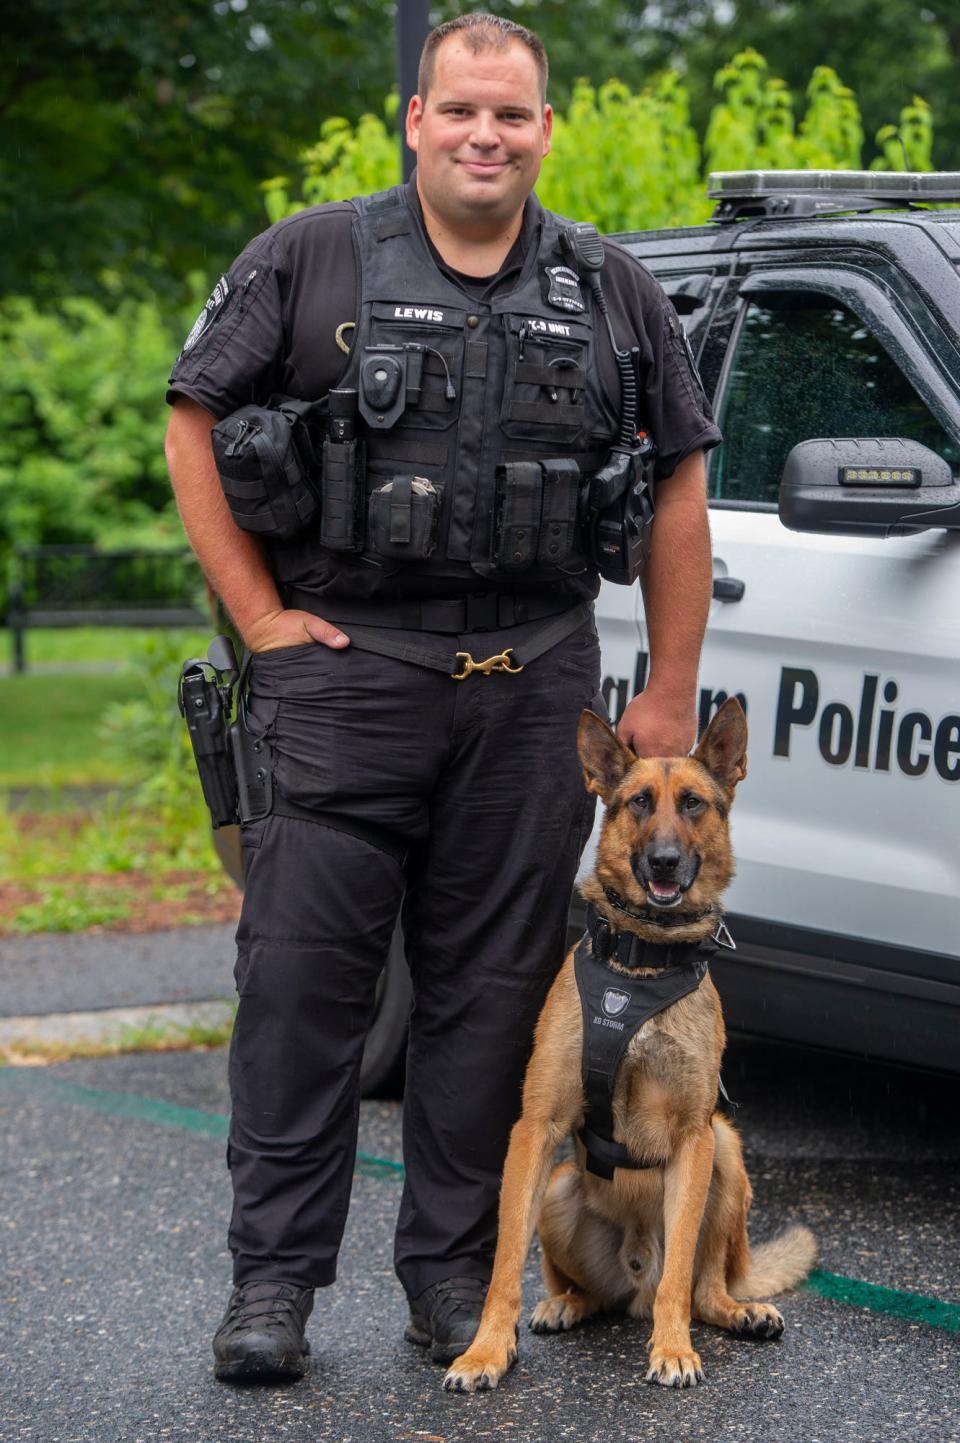 Framingham police officer Andrew Lewis poses with K-9 Murph at Cushing Memorial Park last August. Murph was struck by a gun suspect several times on Sunday evening.